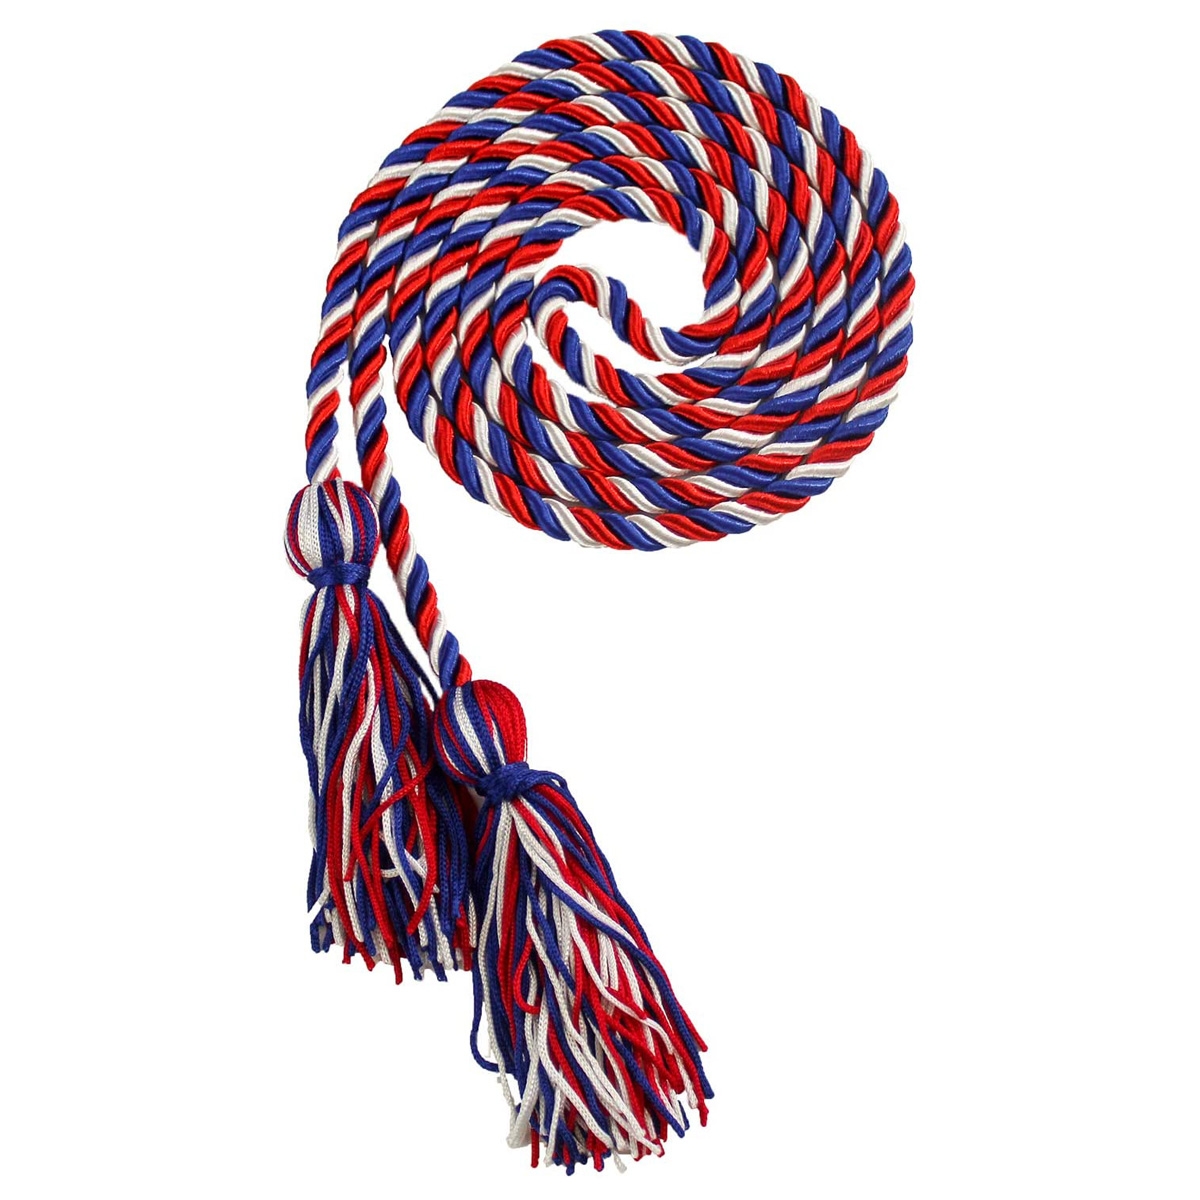 Class Act Graduation 60 Academic Honor Cord, Red White & Blue Braided